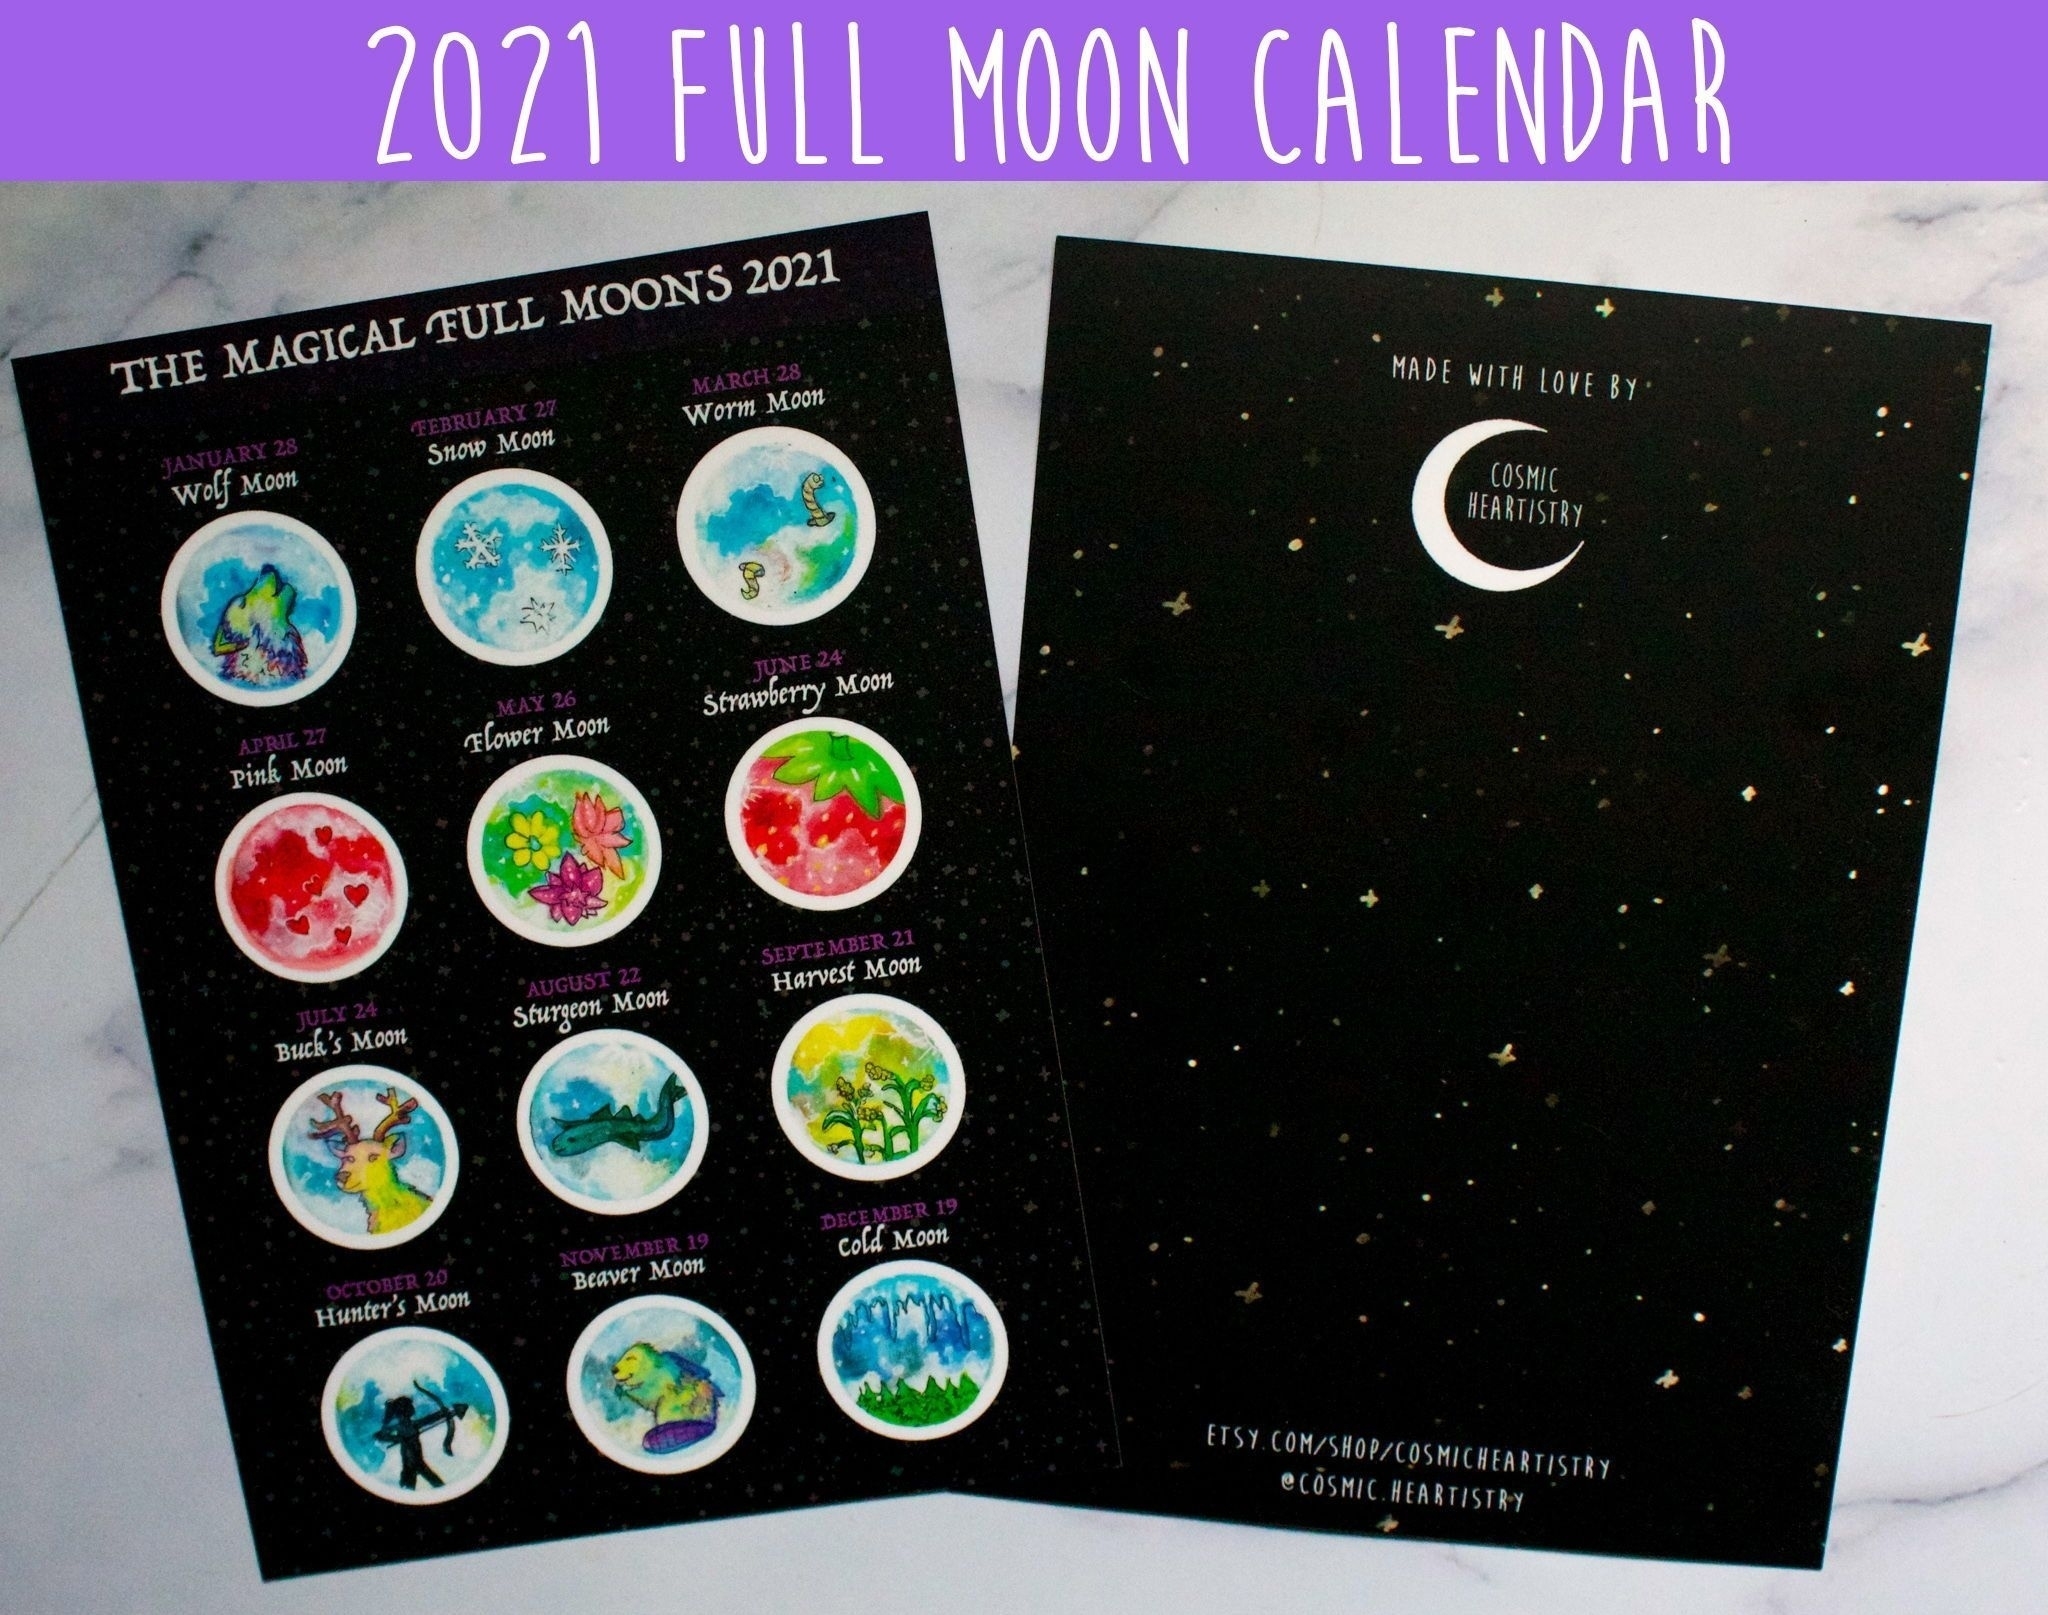 Get Full Moon August 2021 Images - Best Calendar Example August 2021 Calendar With Moon Phases